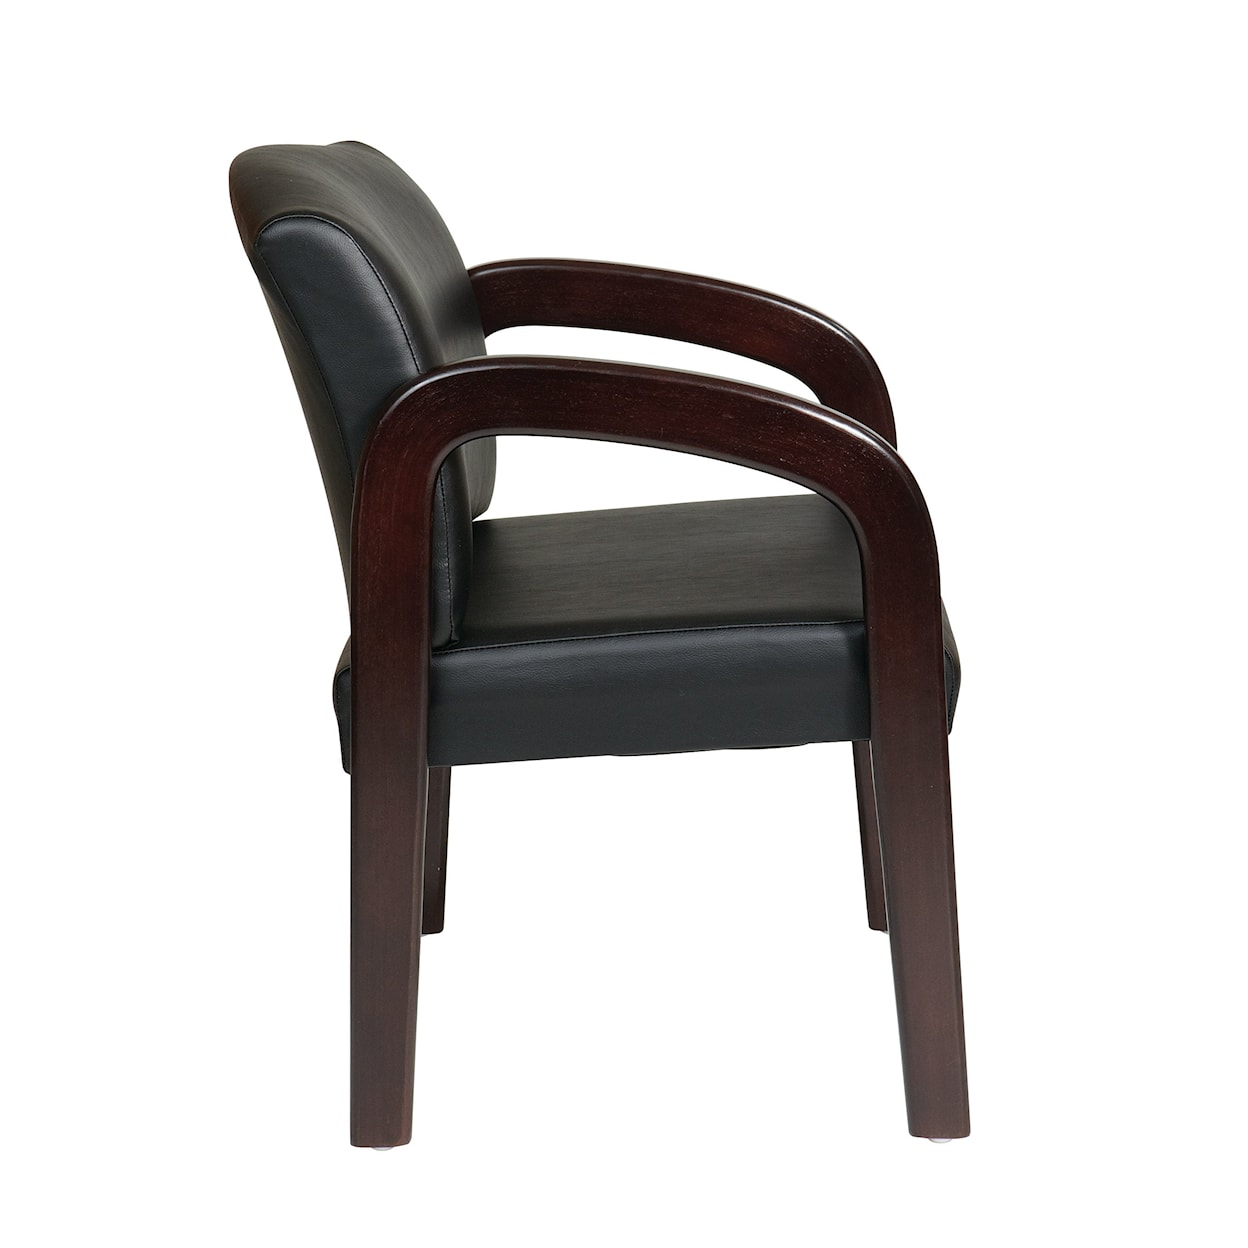 Office Star WD Collection Chair